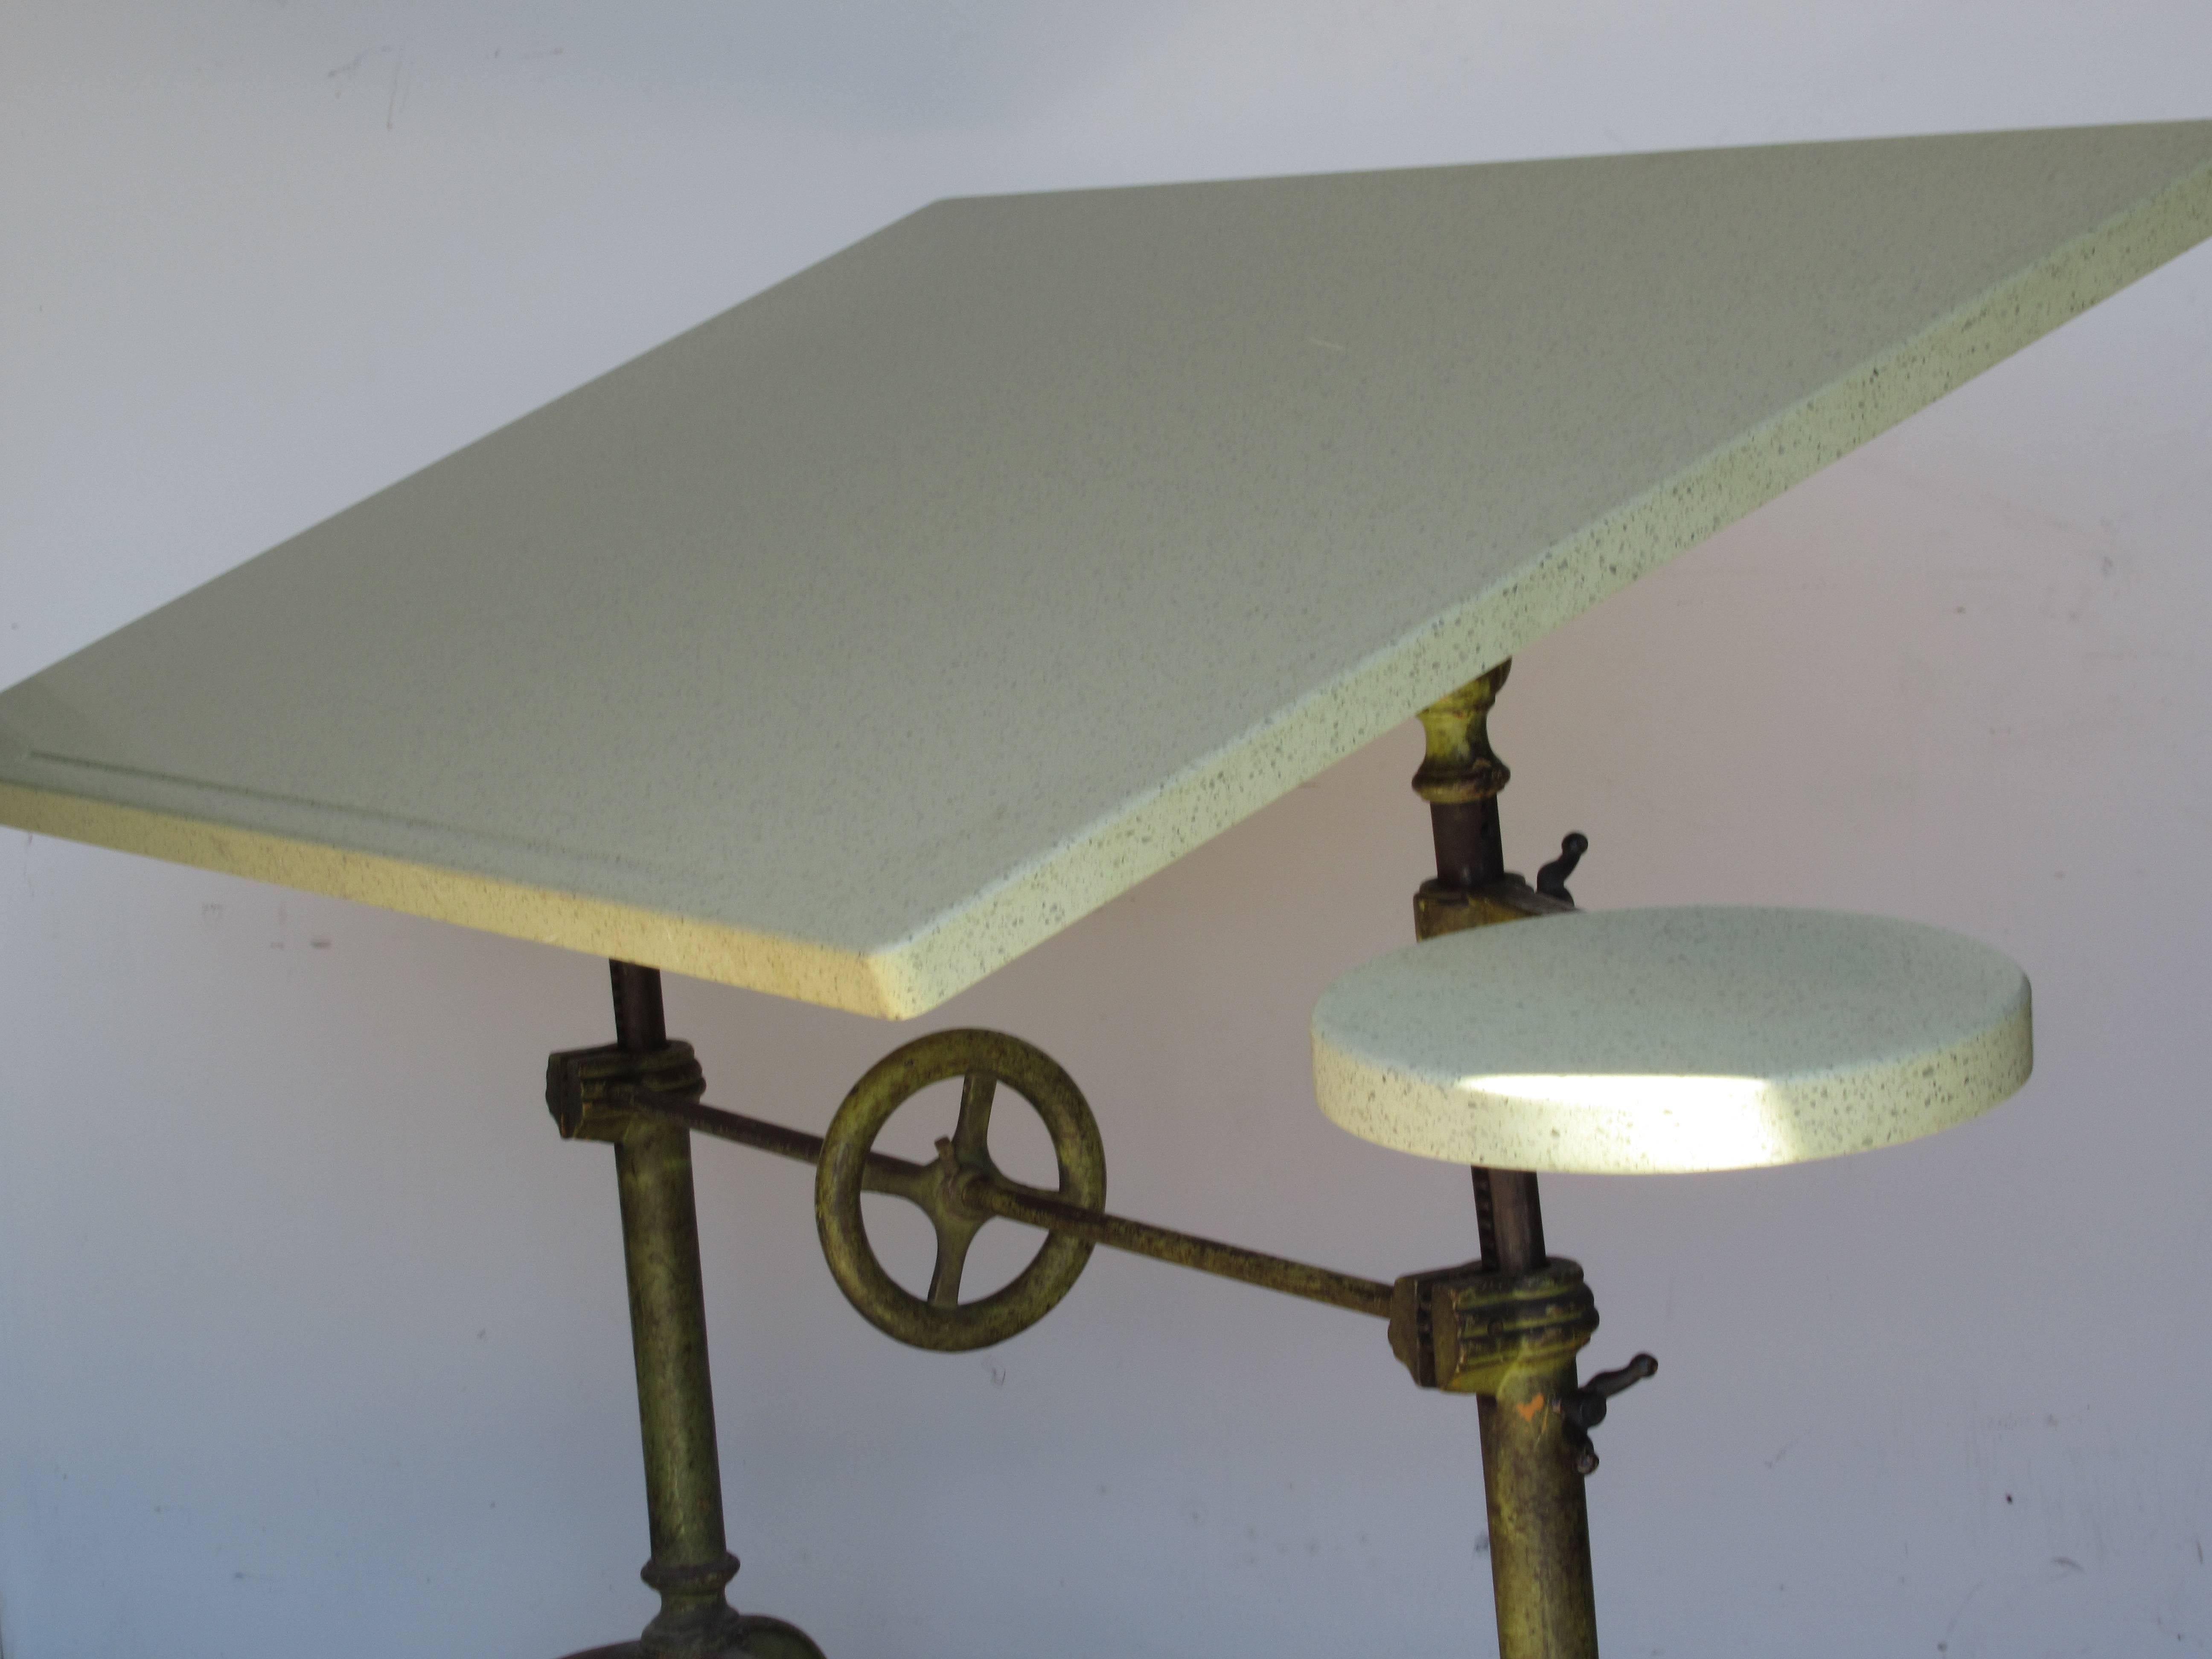 Antique American adjustable height Keuffel & Esser industrial architect drafting table with the best beautifully aged brilliant pea green painted cast iron base fitted with a contemporary custom speckled laminate over wood top and circular swing arm